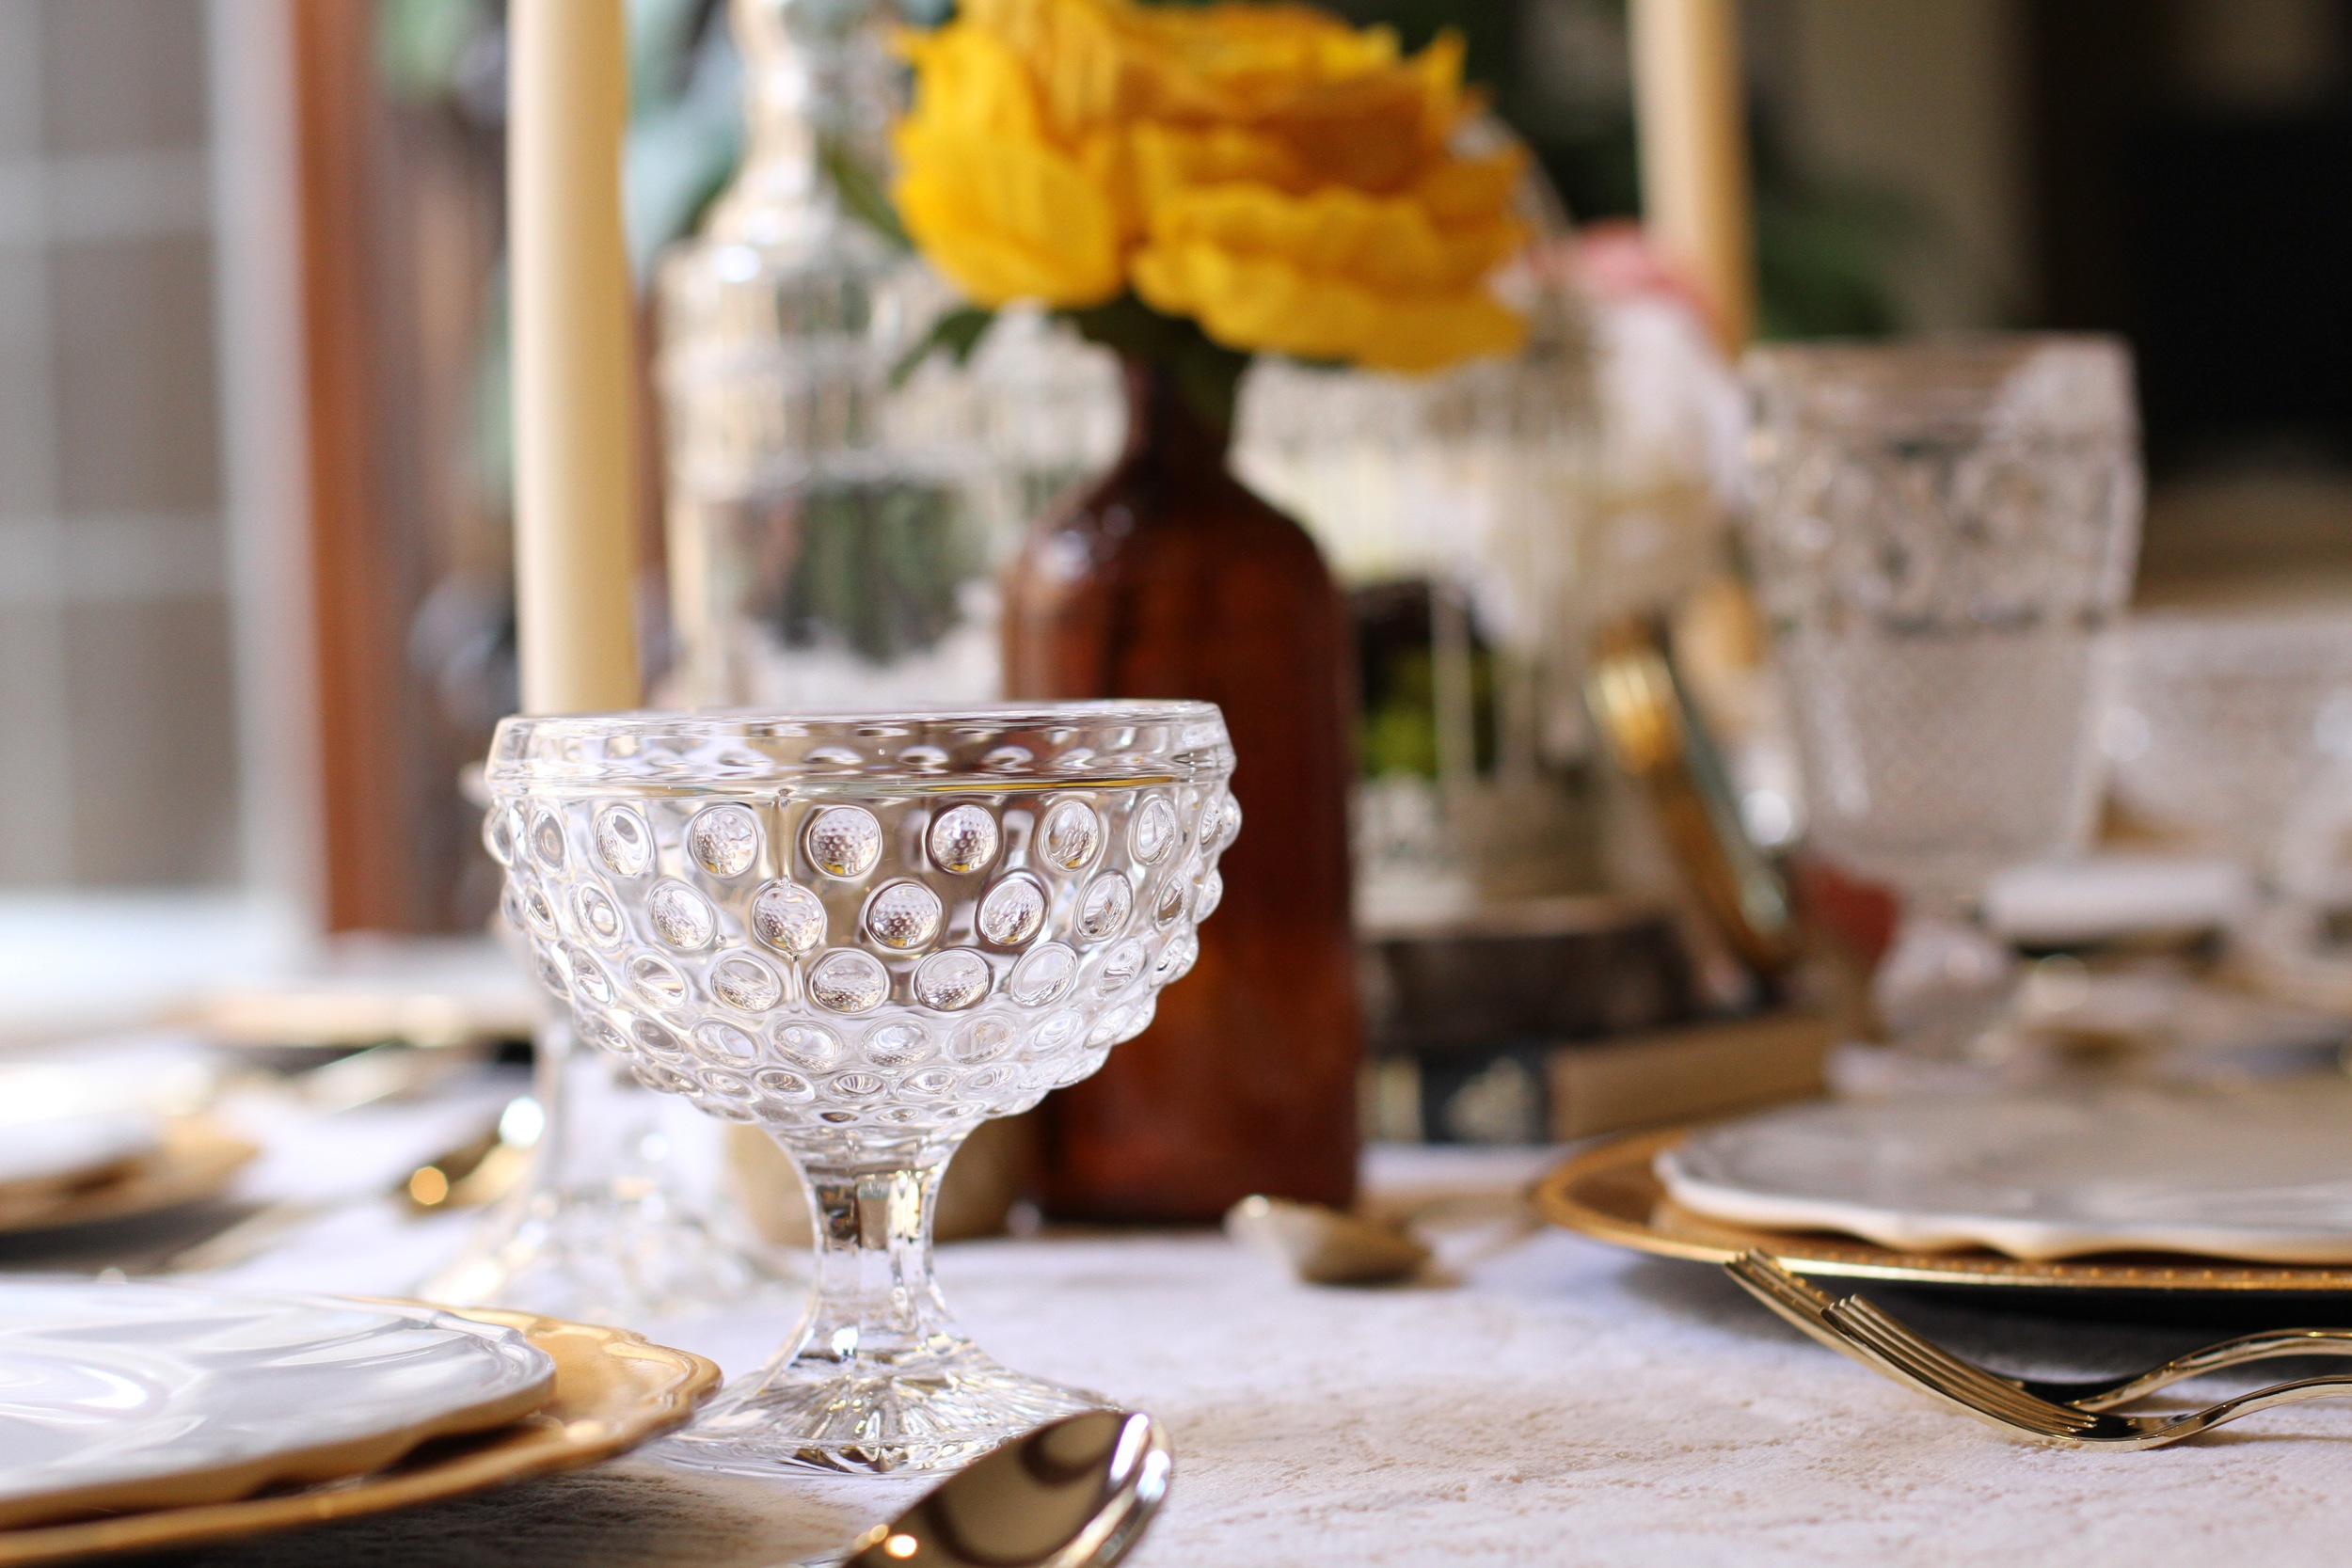 Copy of A Vintage Bird Themed Baby Shower - Ready to Rent from @inJOYtheParty!